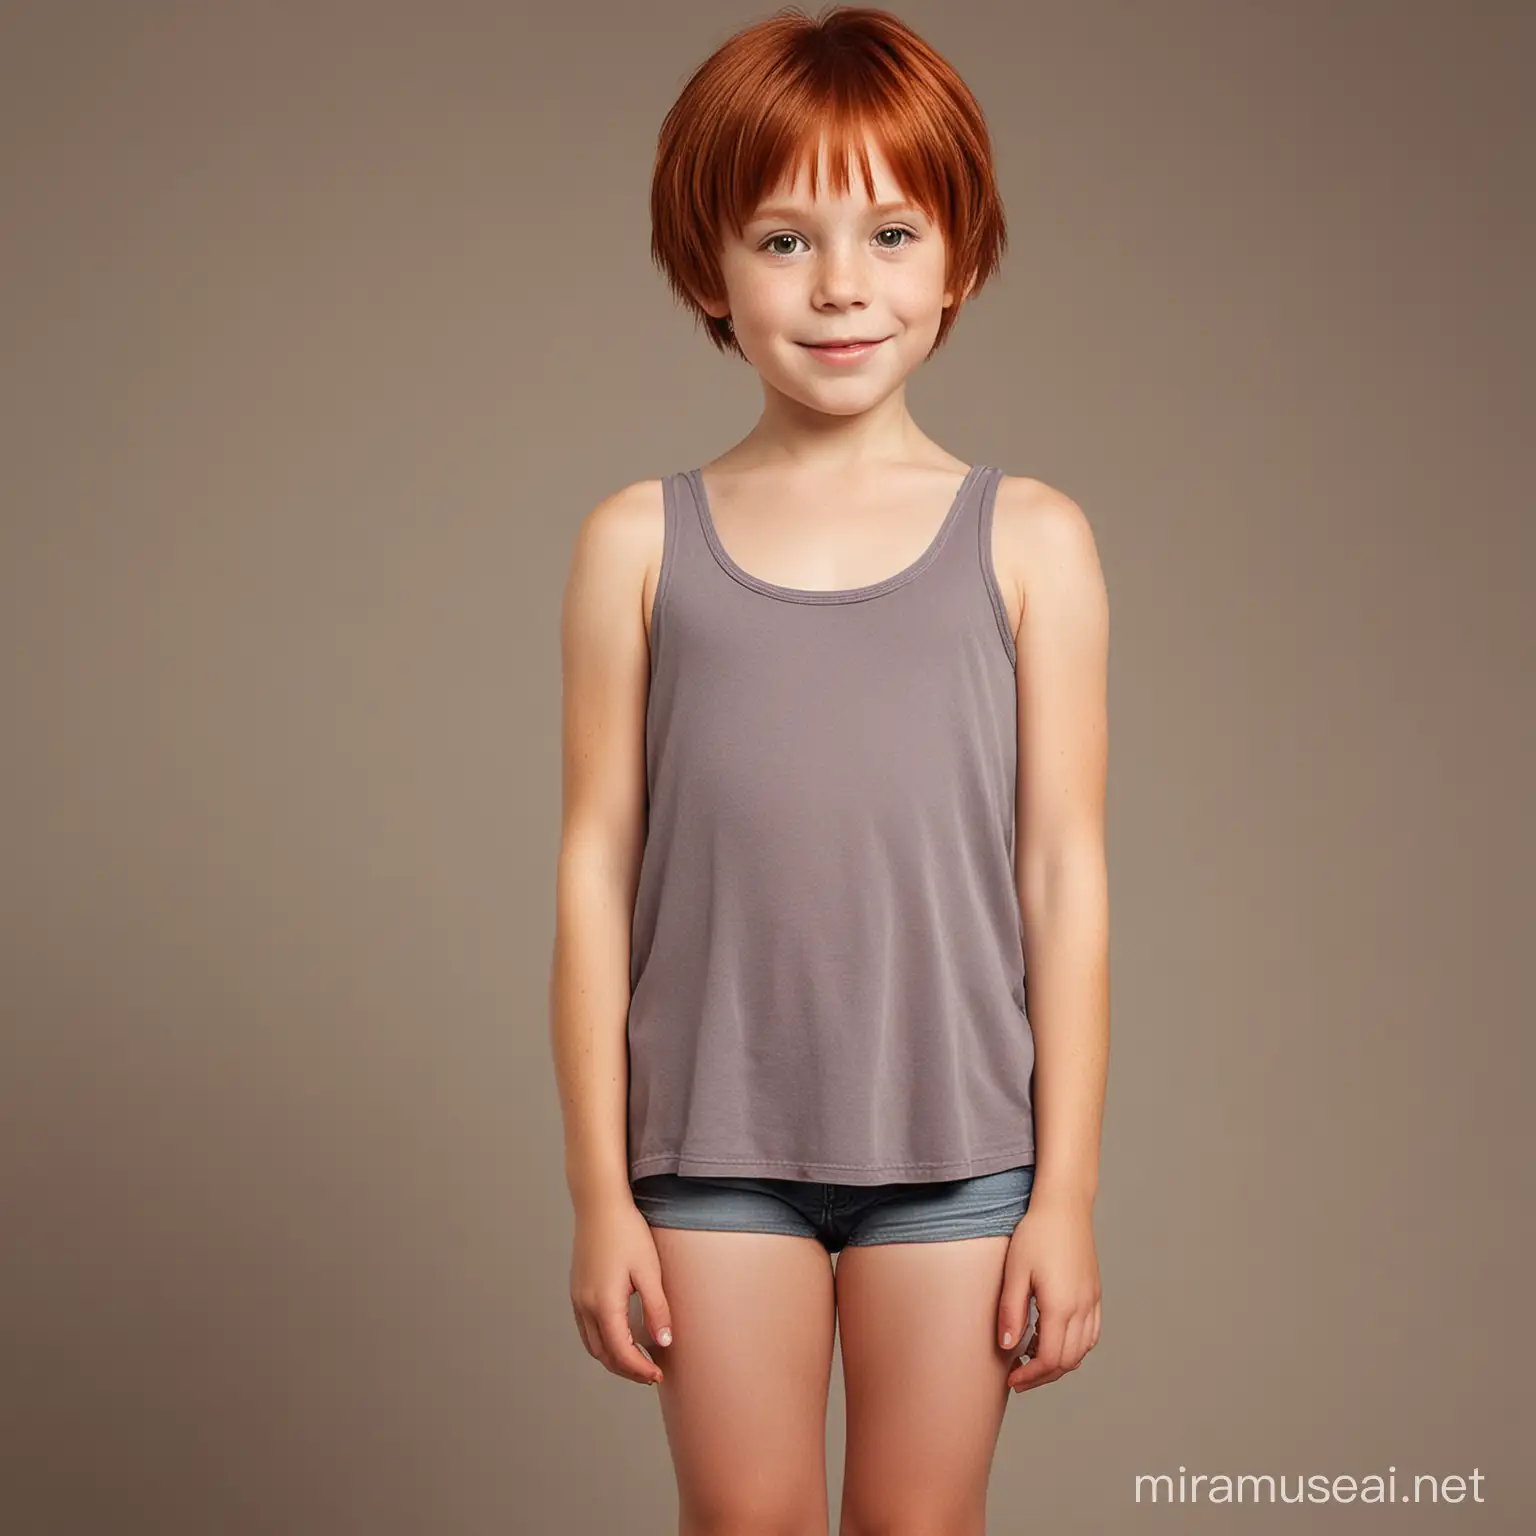 RedHaired 8YearOld Girl with a Confident Stance